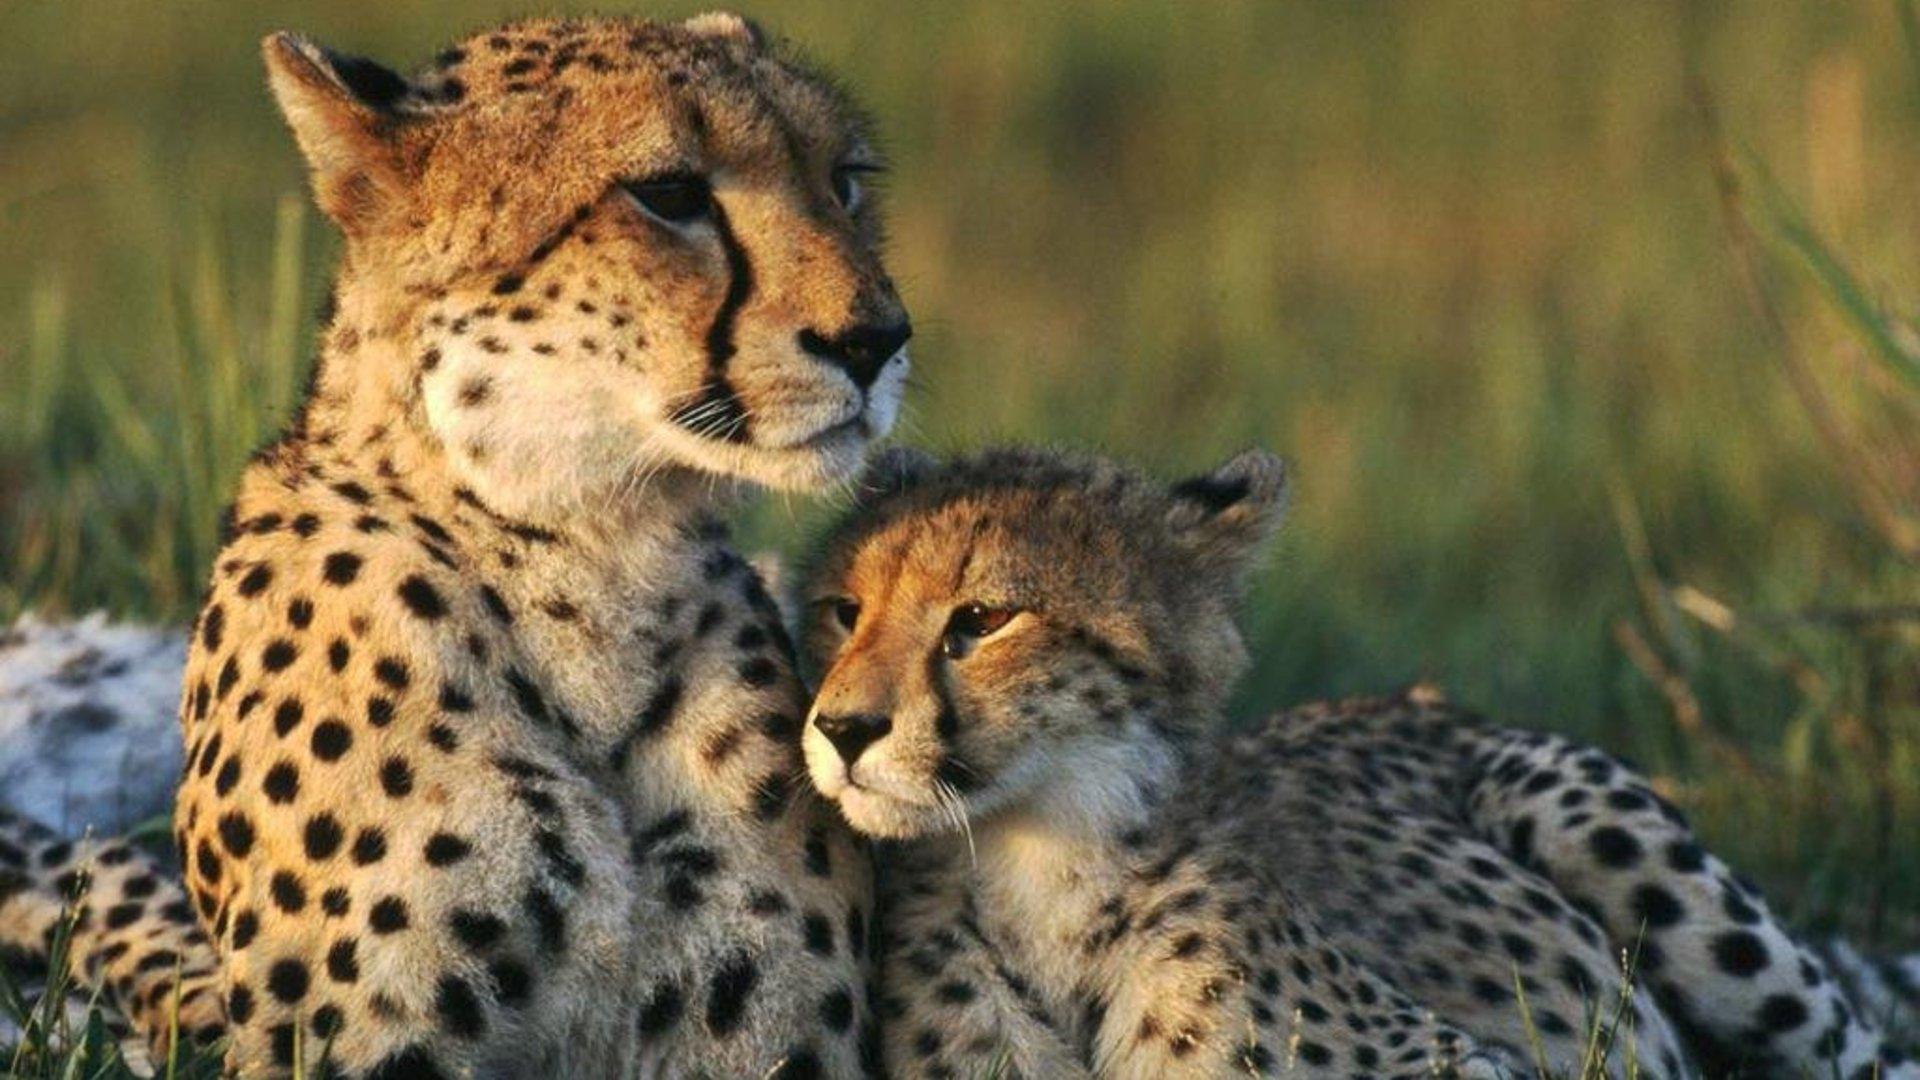 HD Mother and Baby Cheetah Wallpaper HD Full Size - HiReWallpapers ...